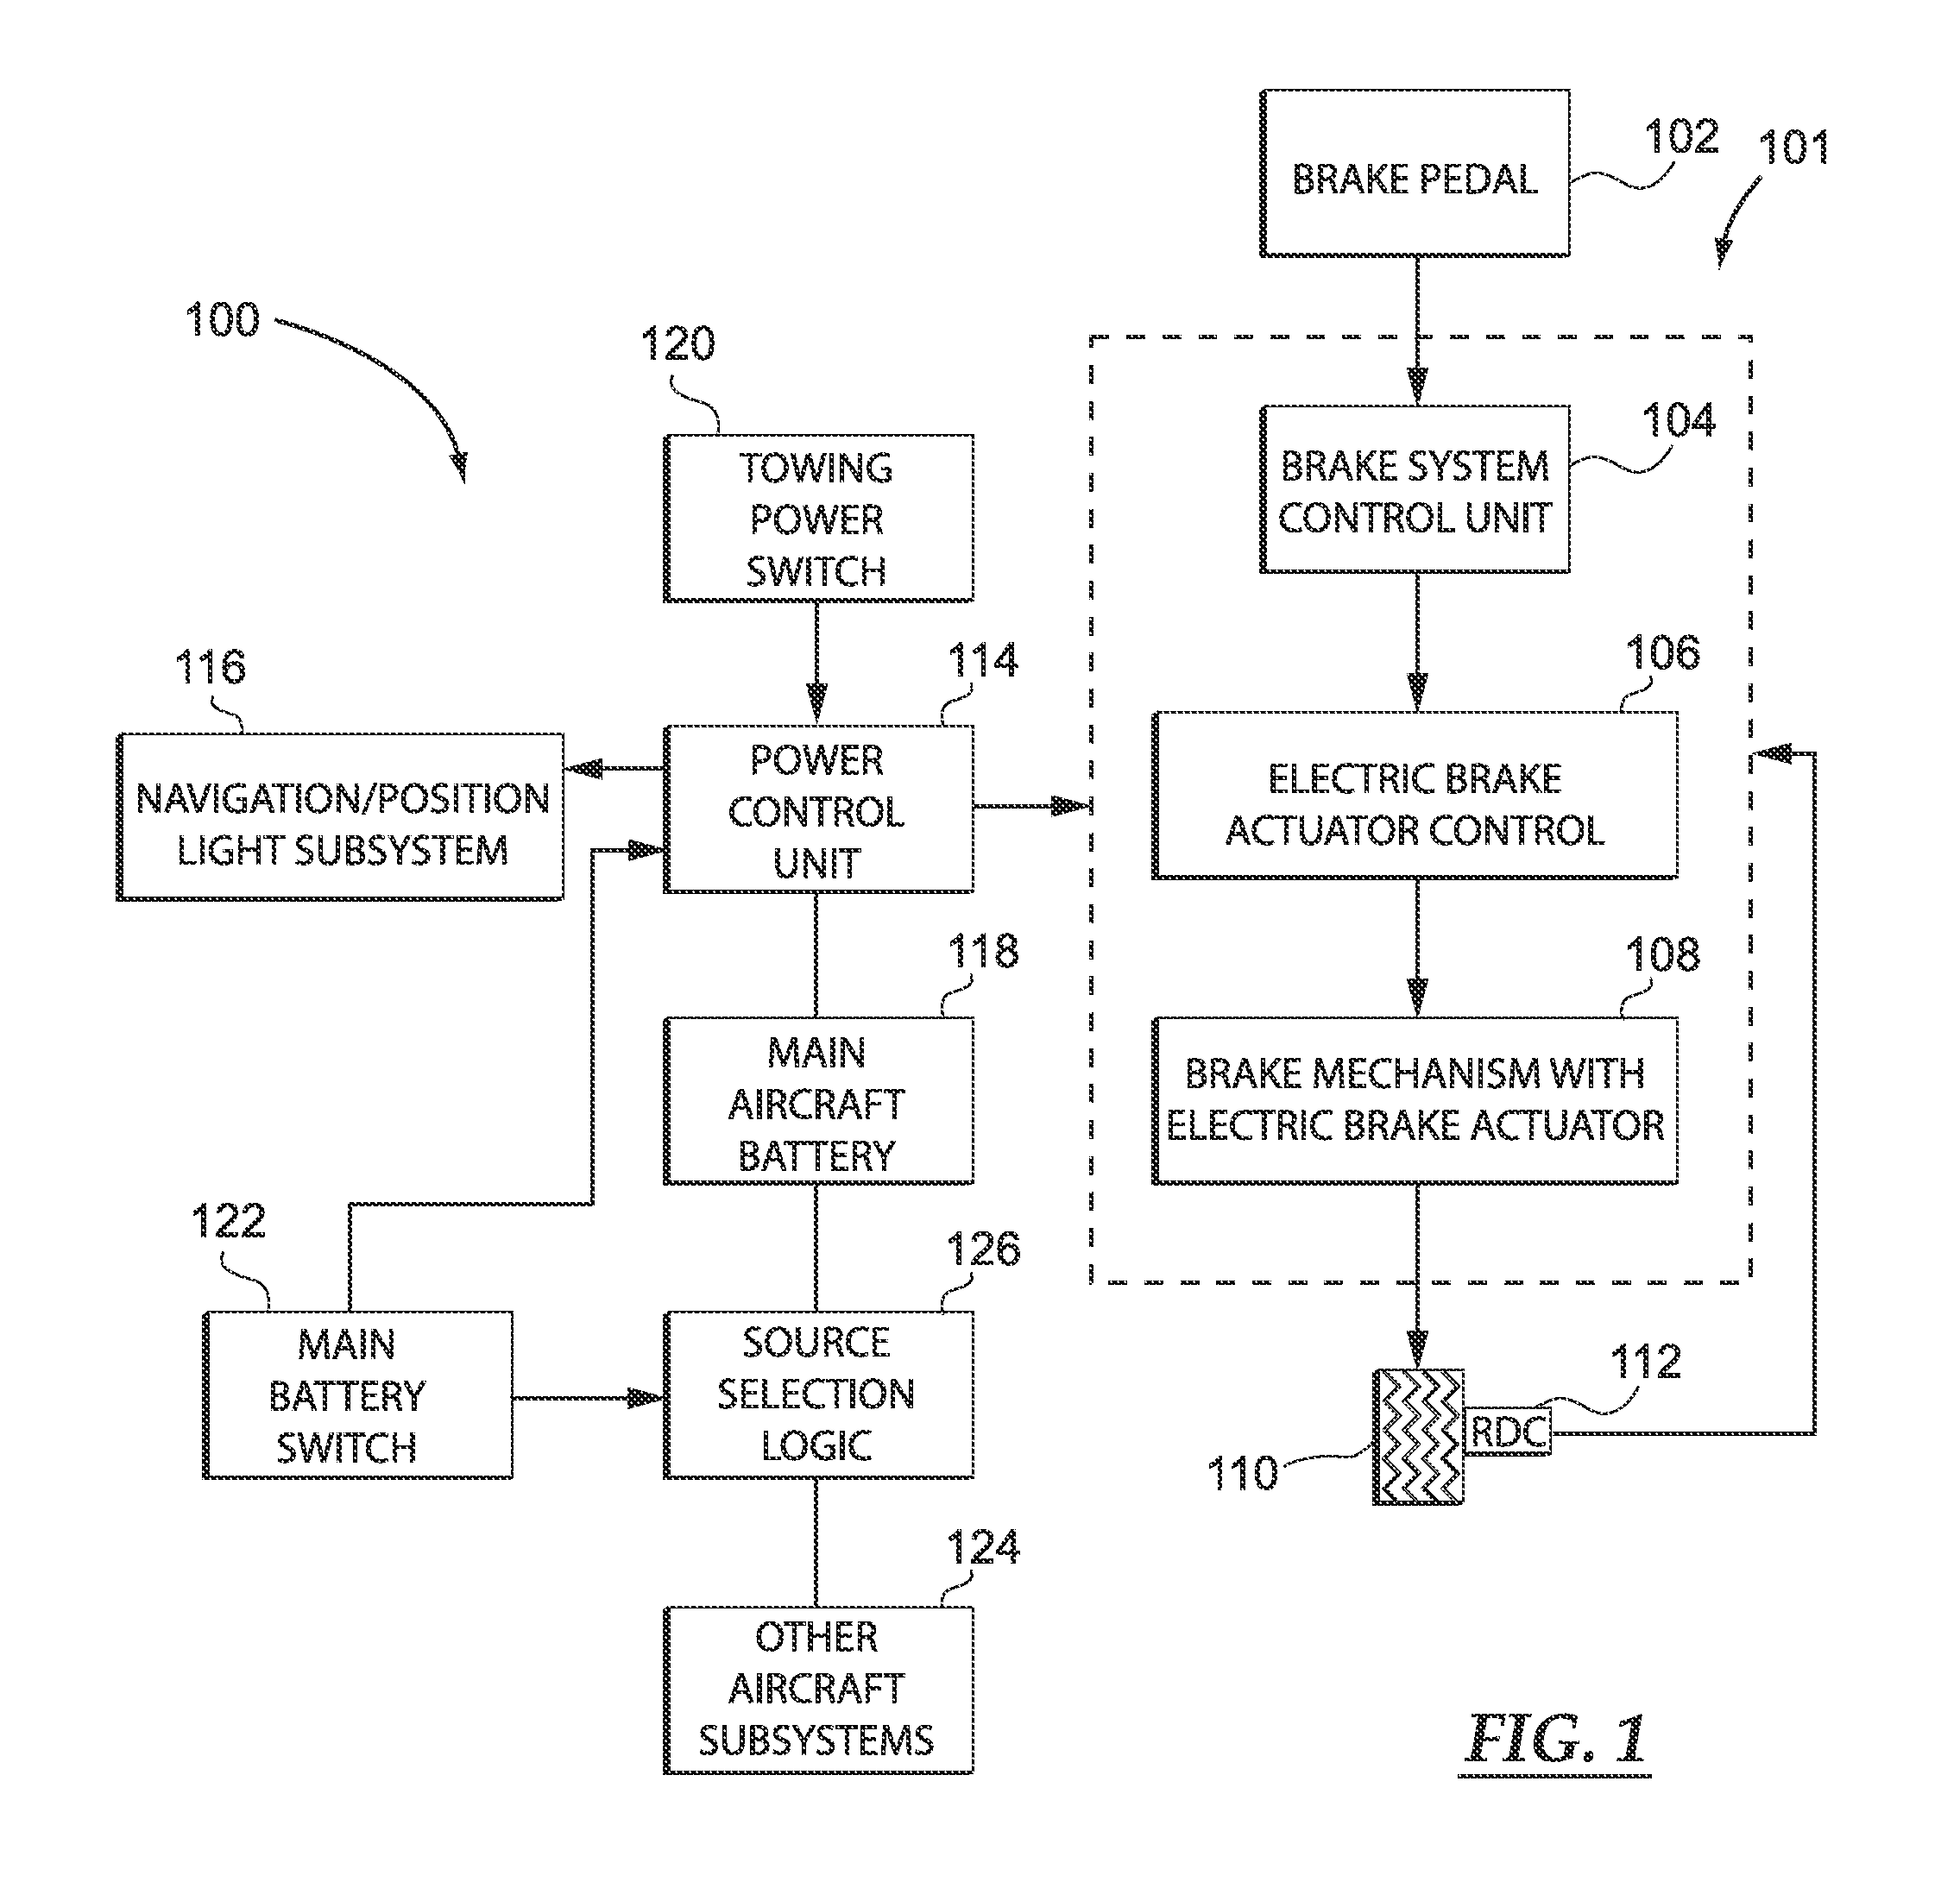 Ground towing power architecture for an electric brake system of an aircraft